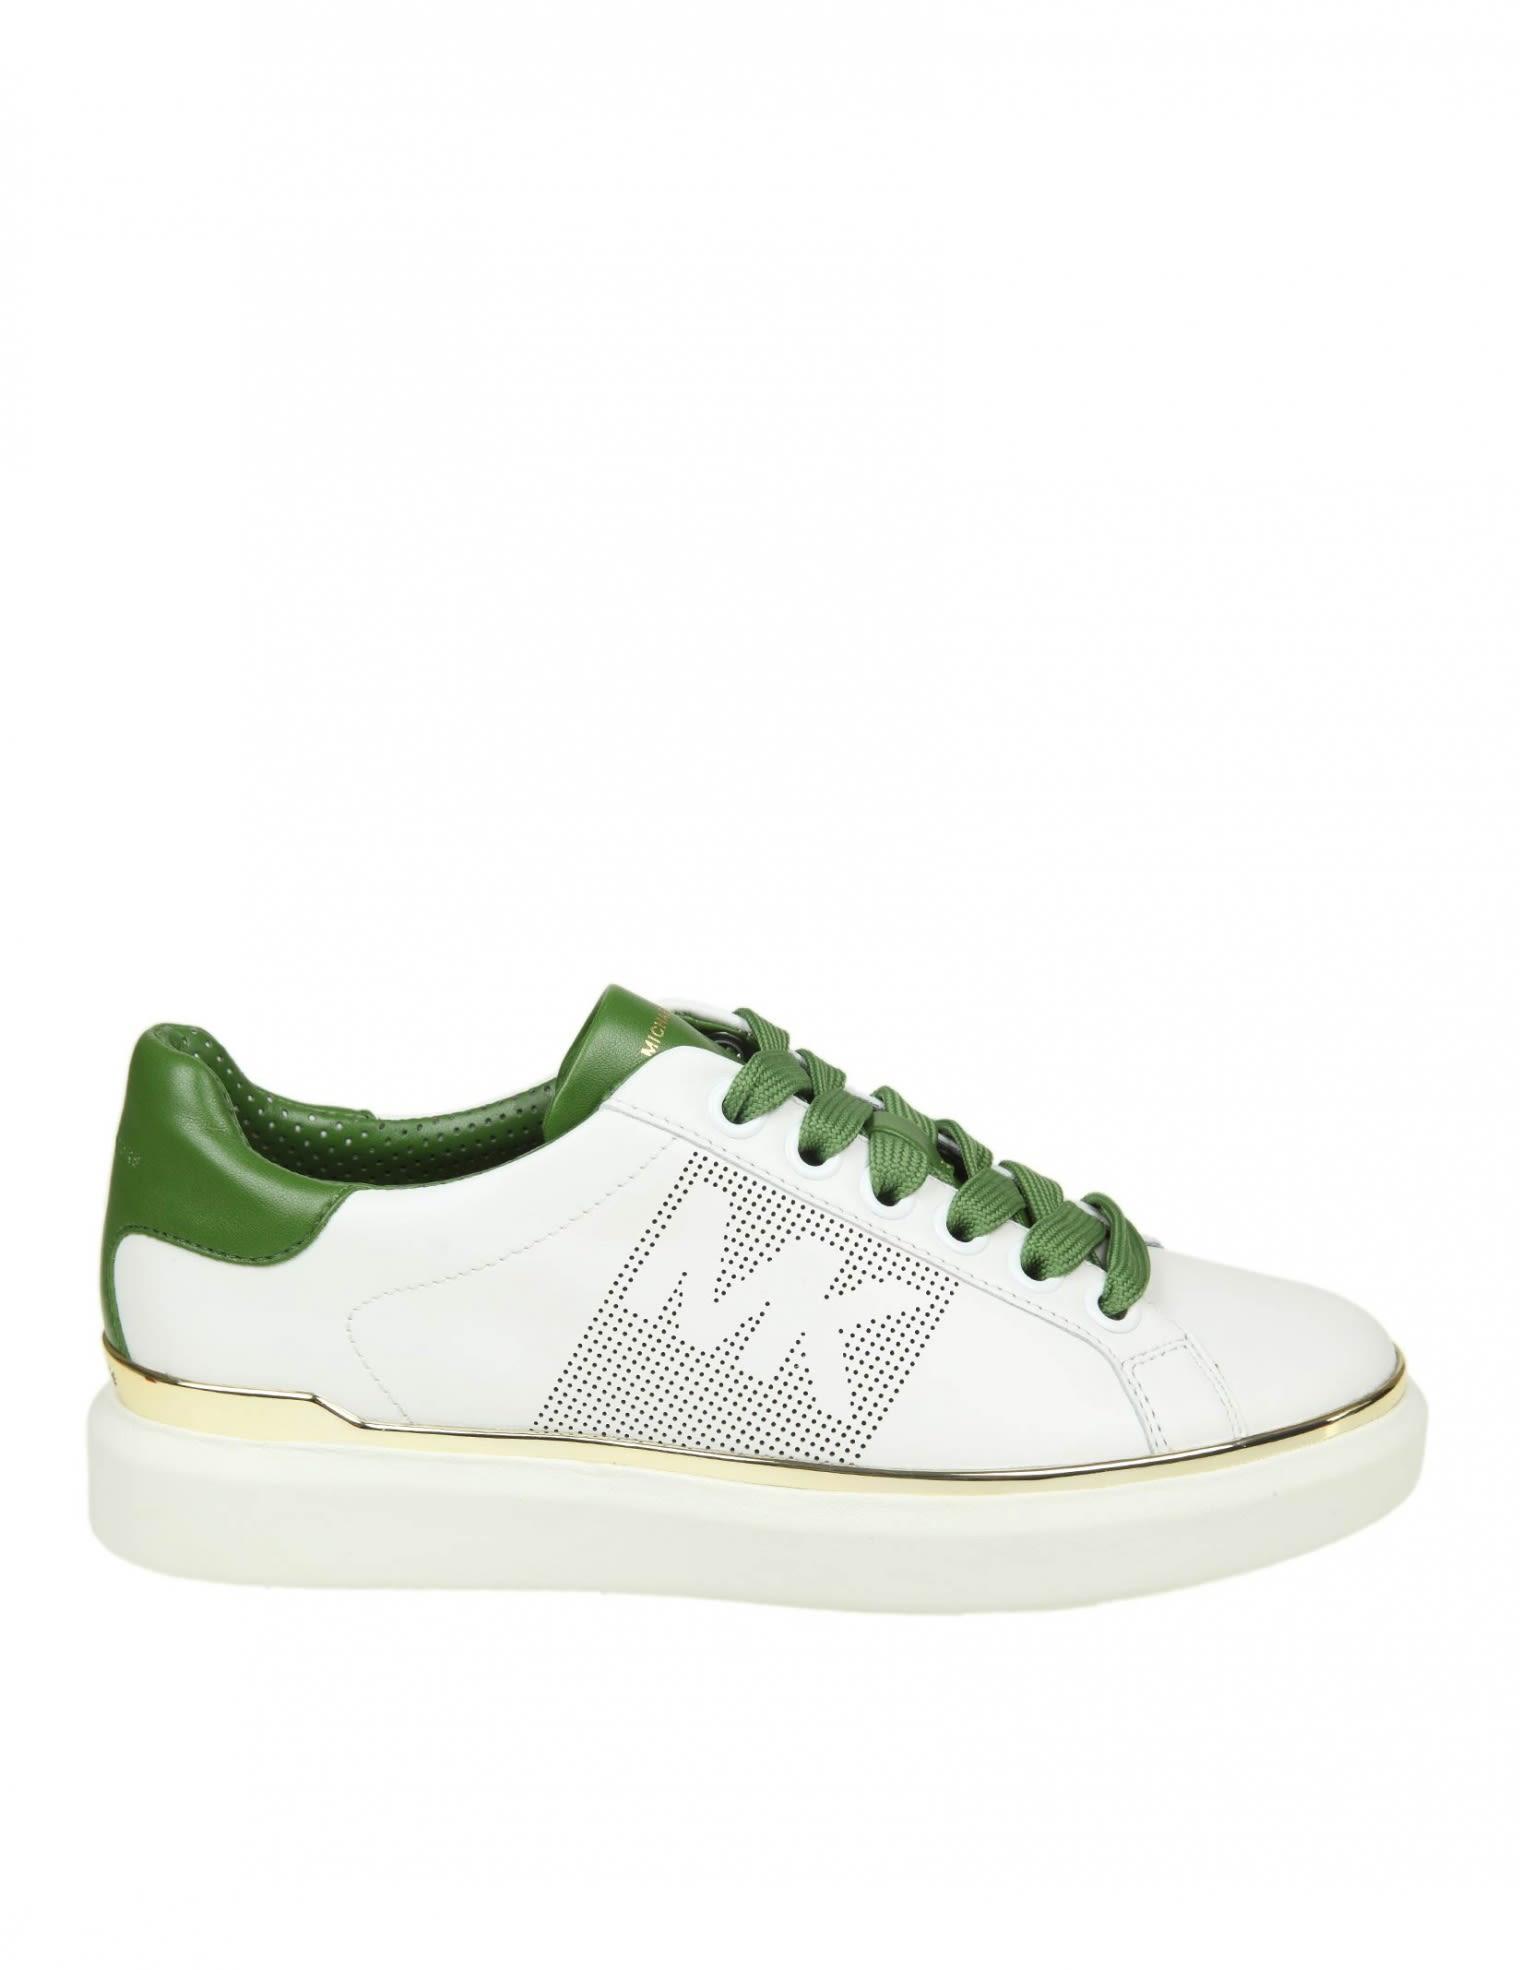 Michael Kors "max Lace Up" Sneakers In White Color Leather In White/green |  ModeSens